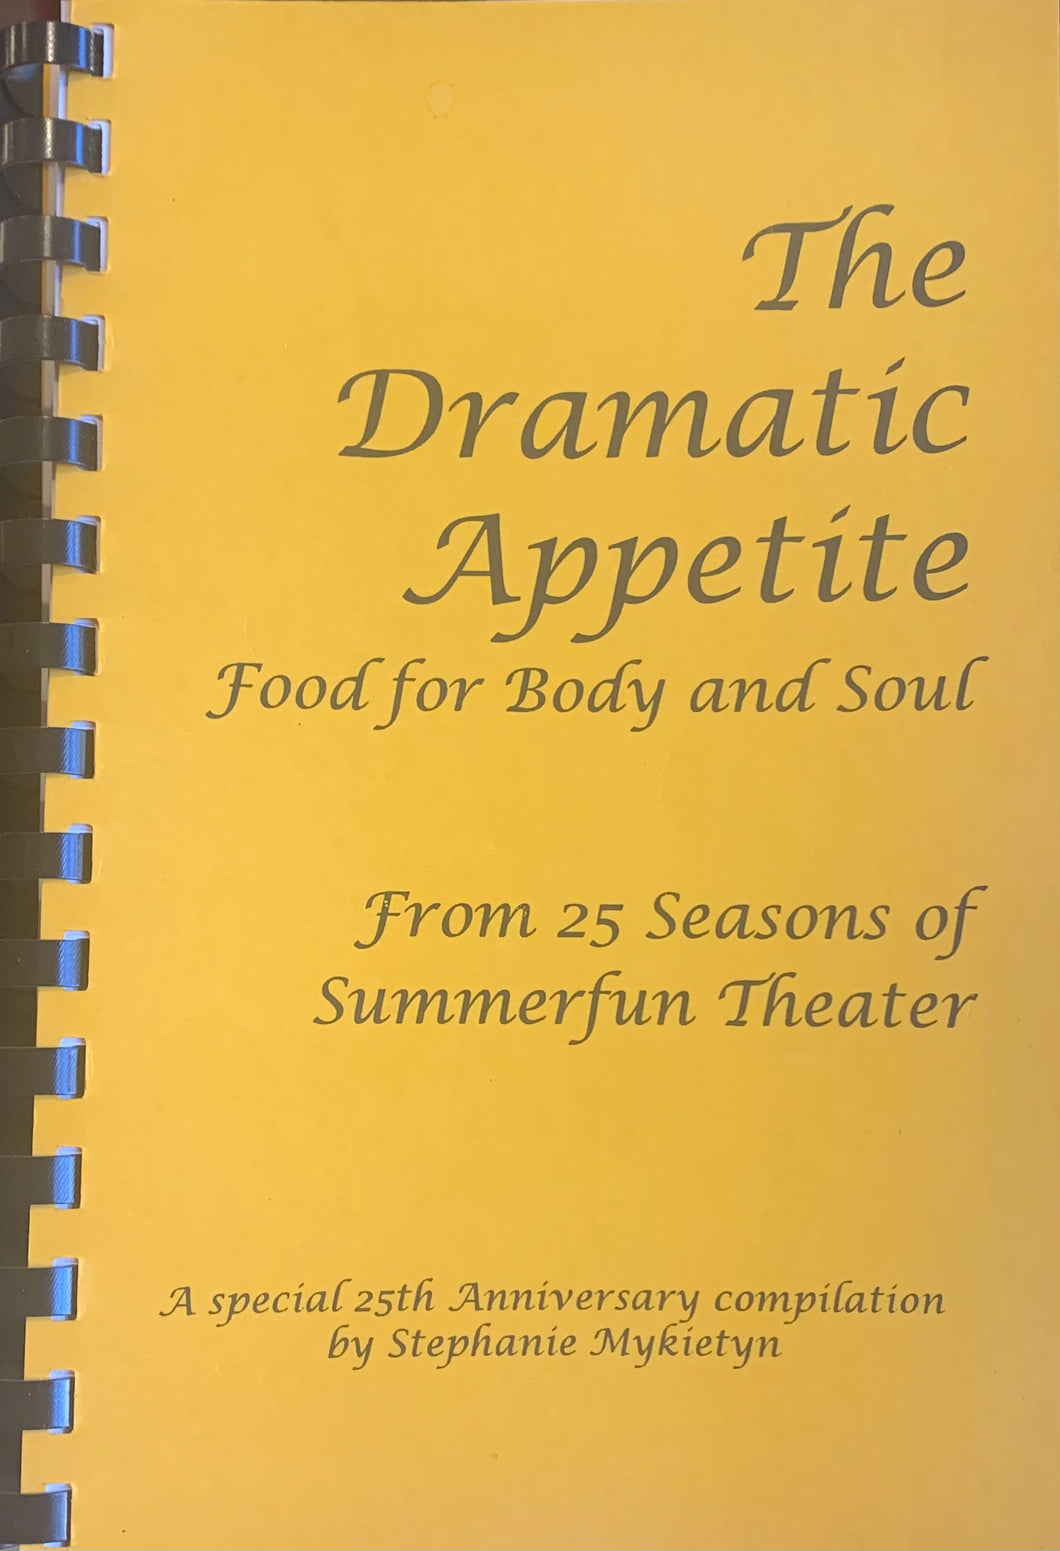 The Dramatic Appetite Food for Body and Soul From 25 Seasons of Summerfun Theater by Stephanie Mykietyn